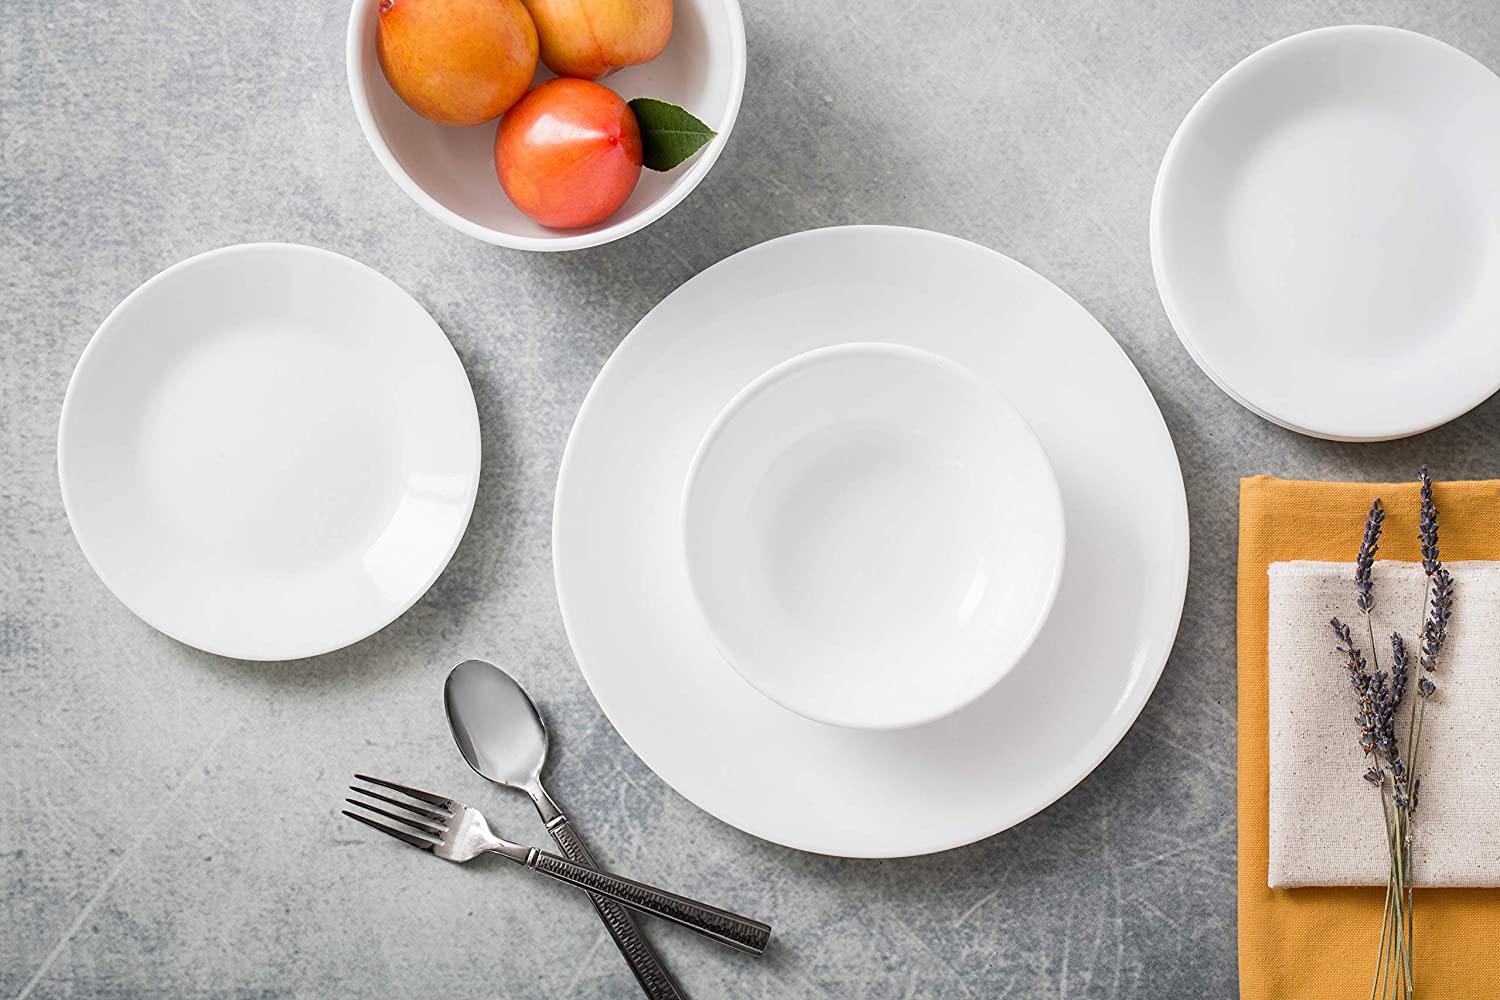 What Dinnerware Is Lead And Cadmium Free?